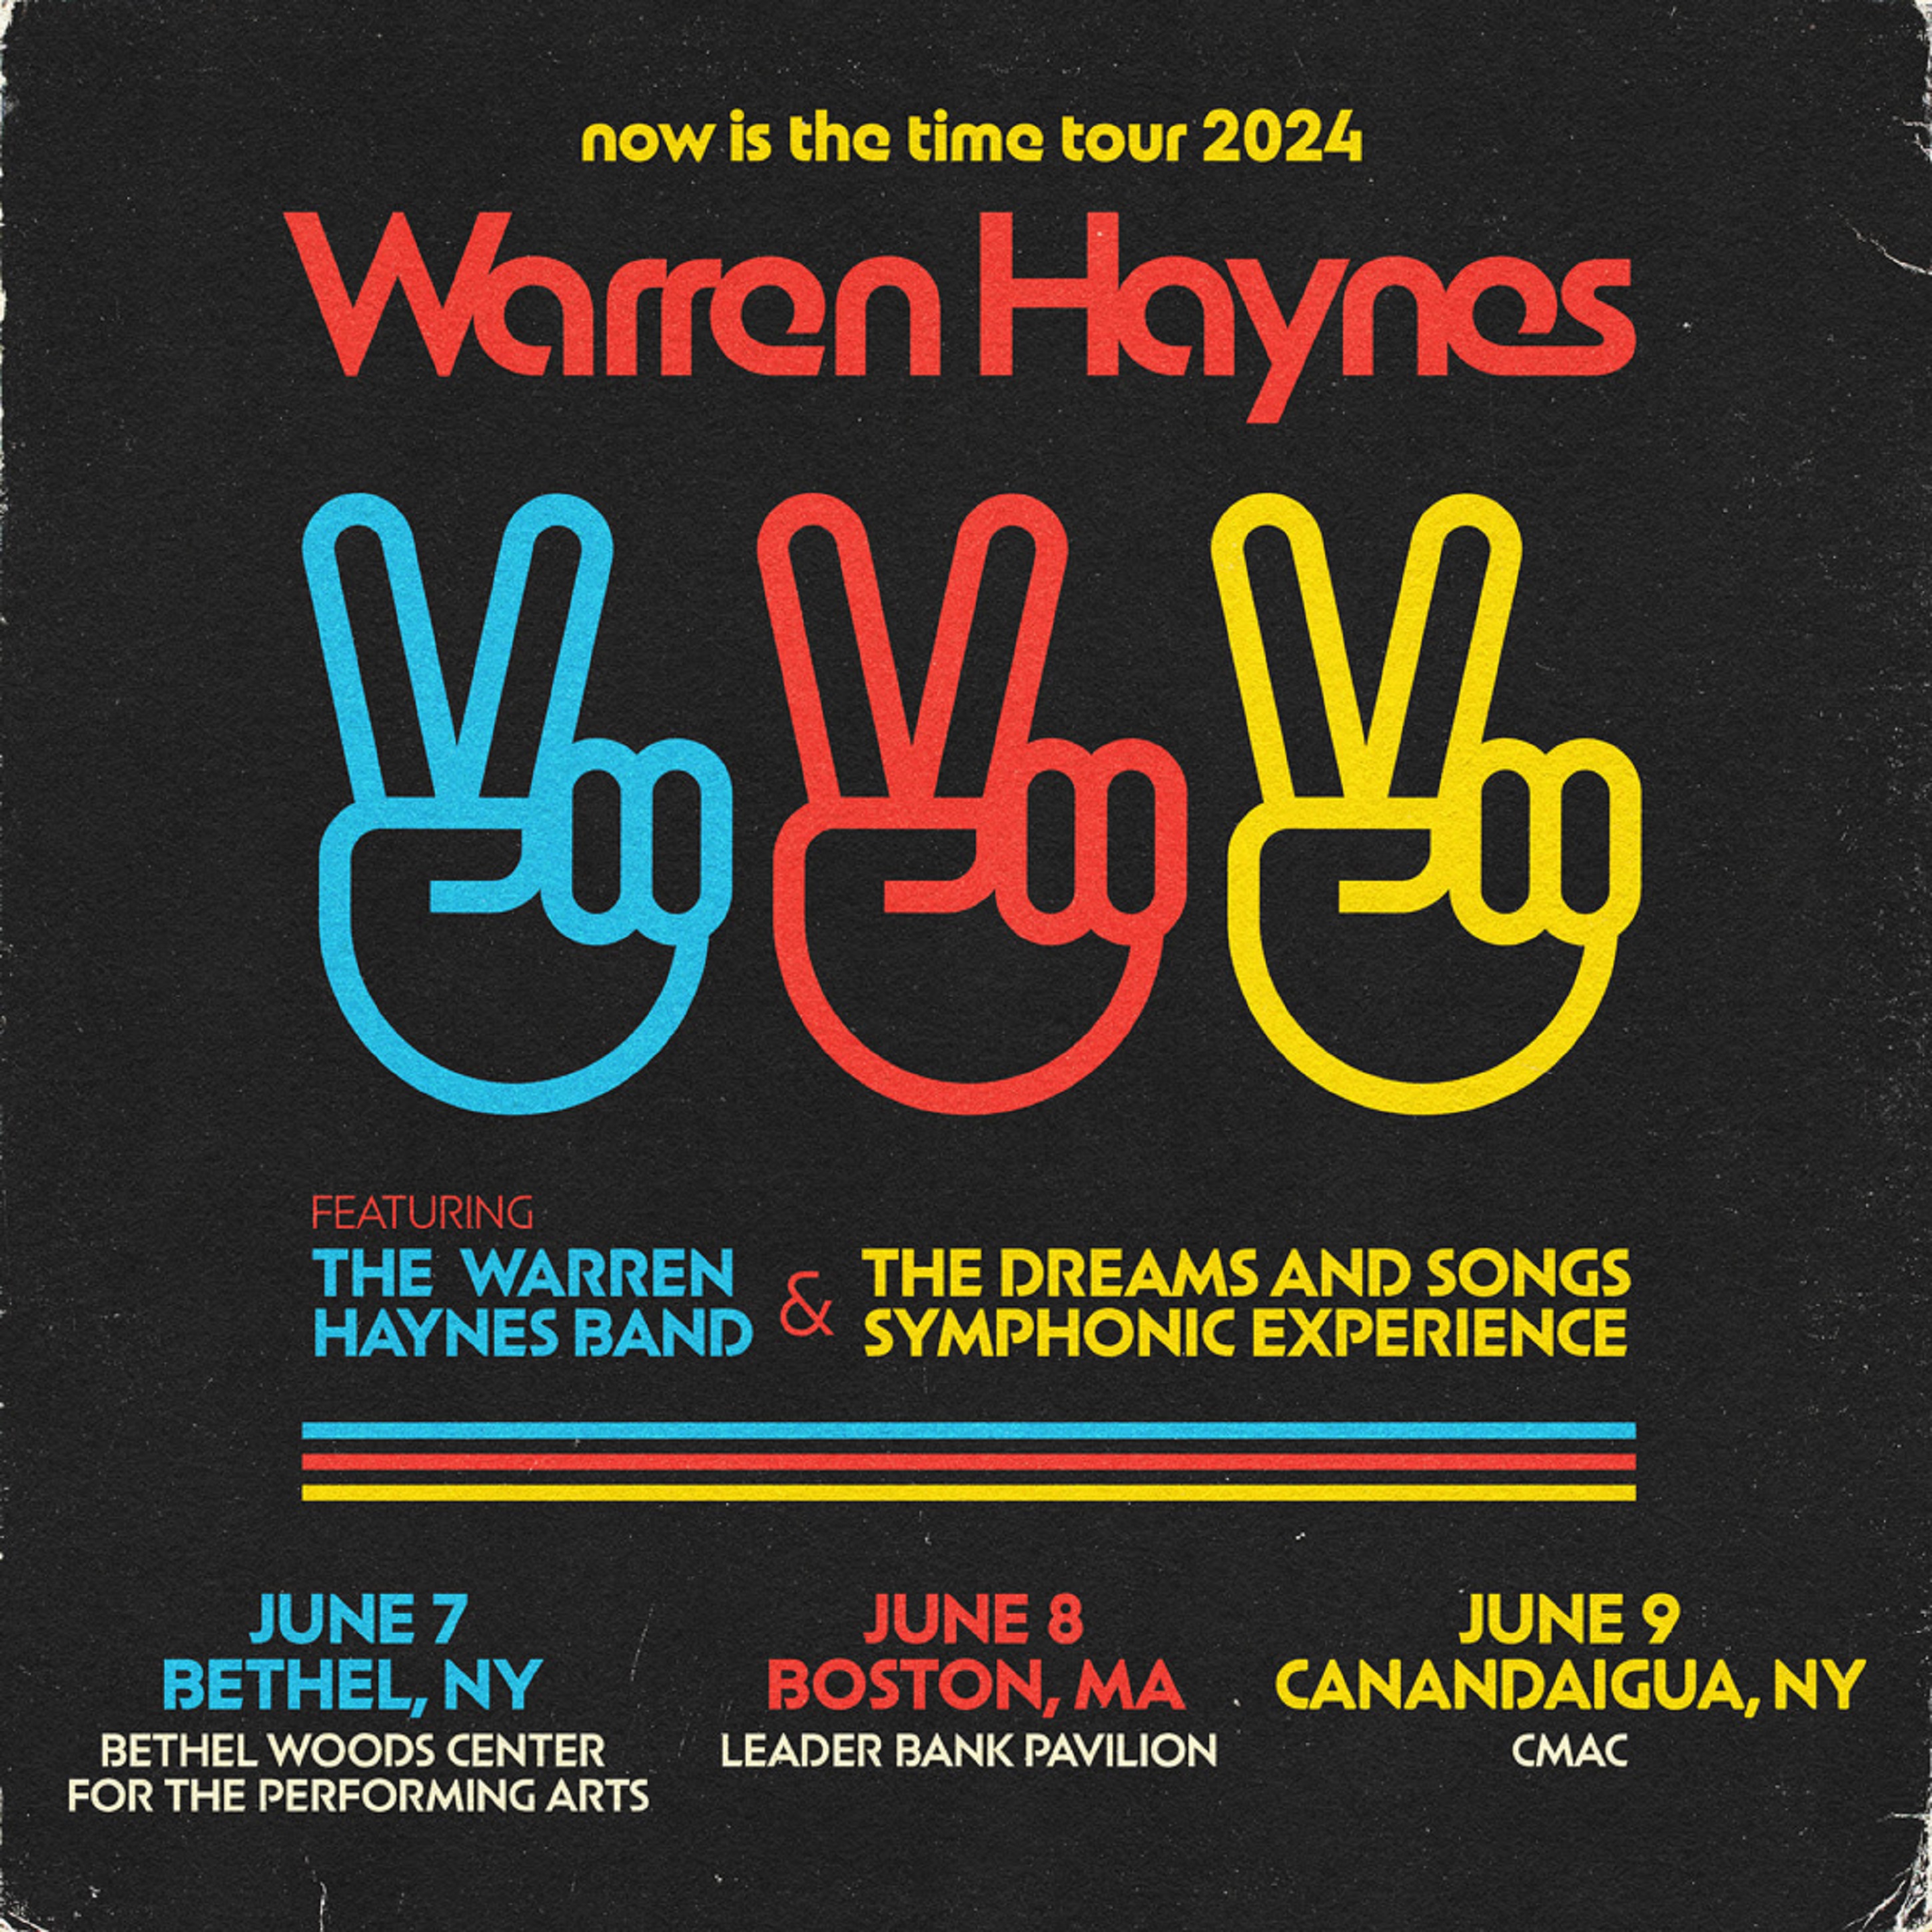 Warren Haynes Announces Now Is The Time Tour featuring The Warren Haynes Band & The Dreams and Songs Symphonic Experience